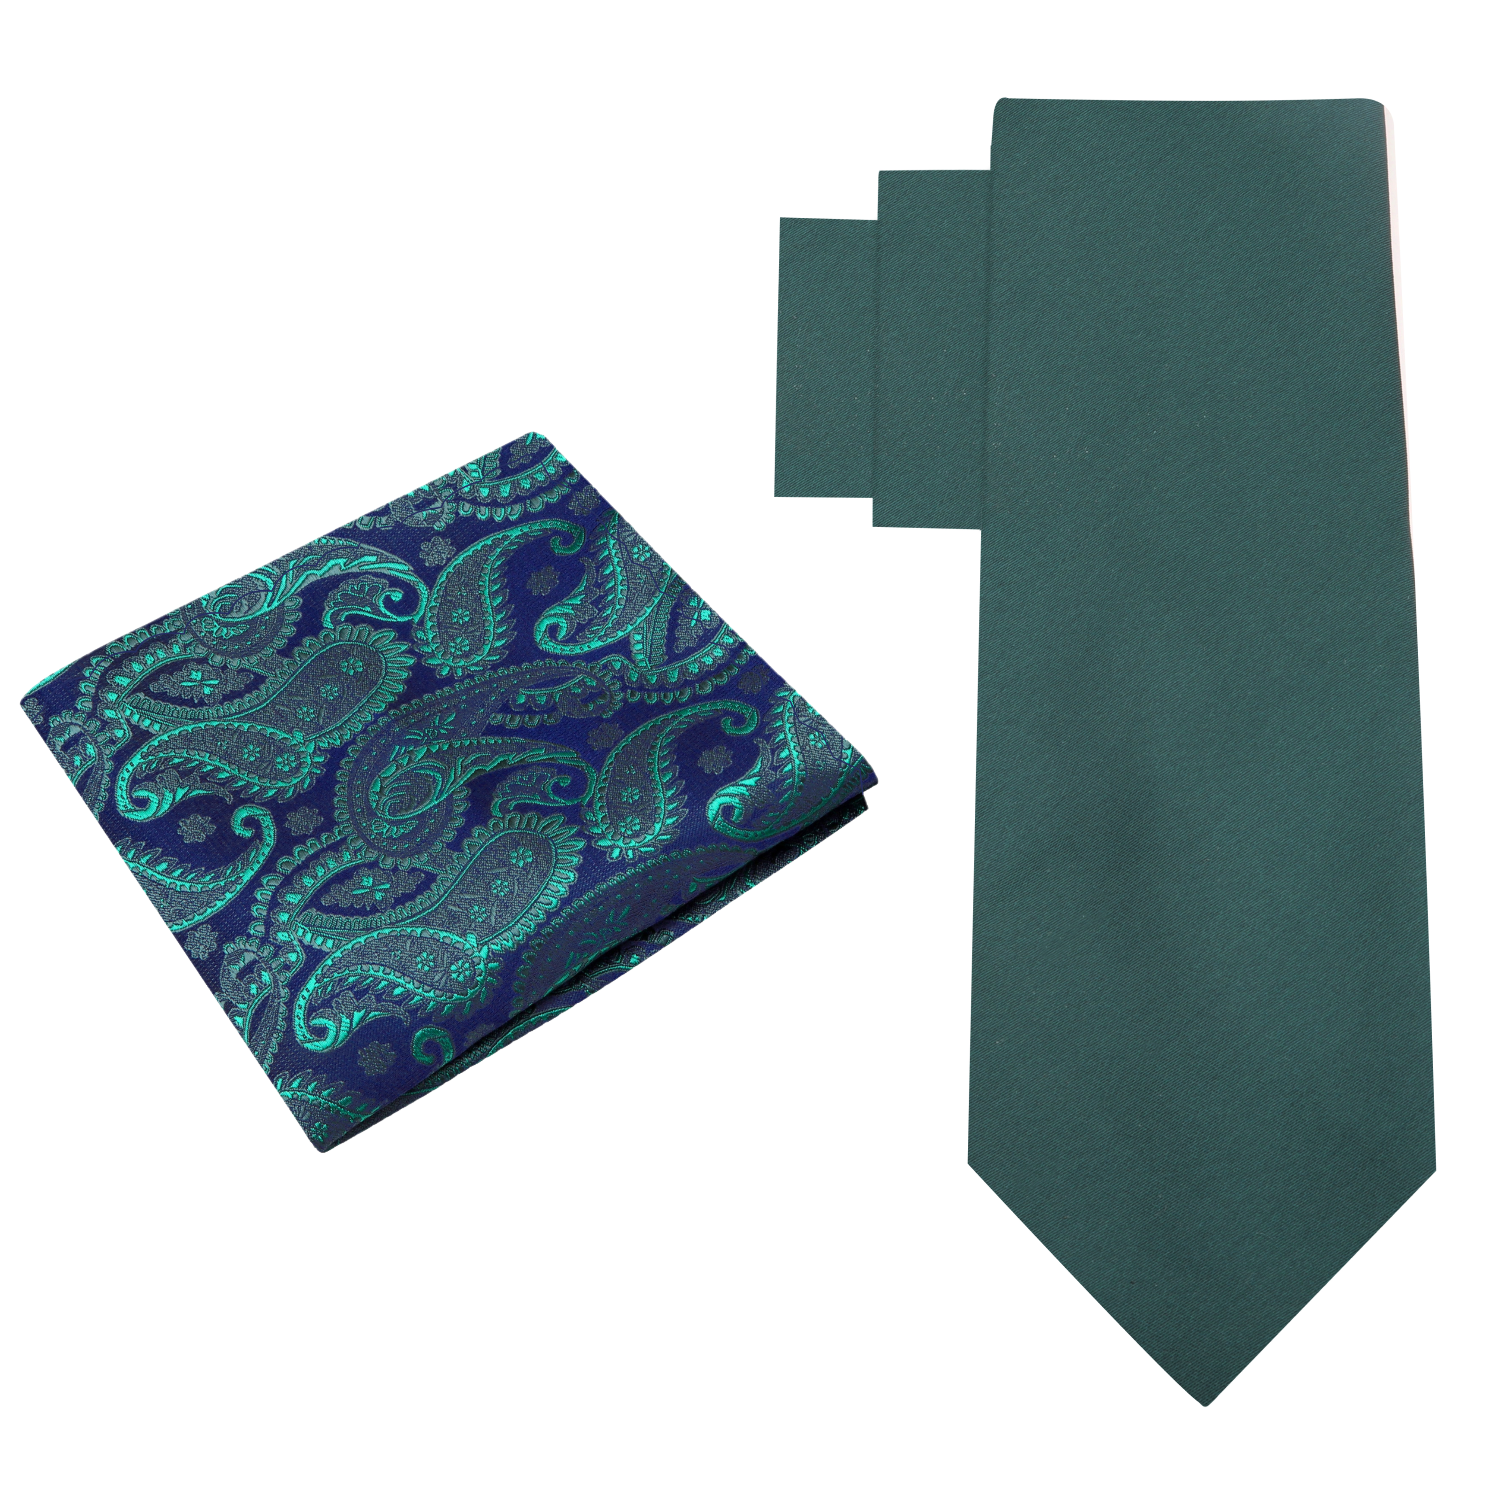 Alt View: Solid Forest Green Necktie and Accenting Blue and Green Paisley Square